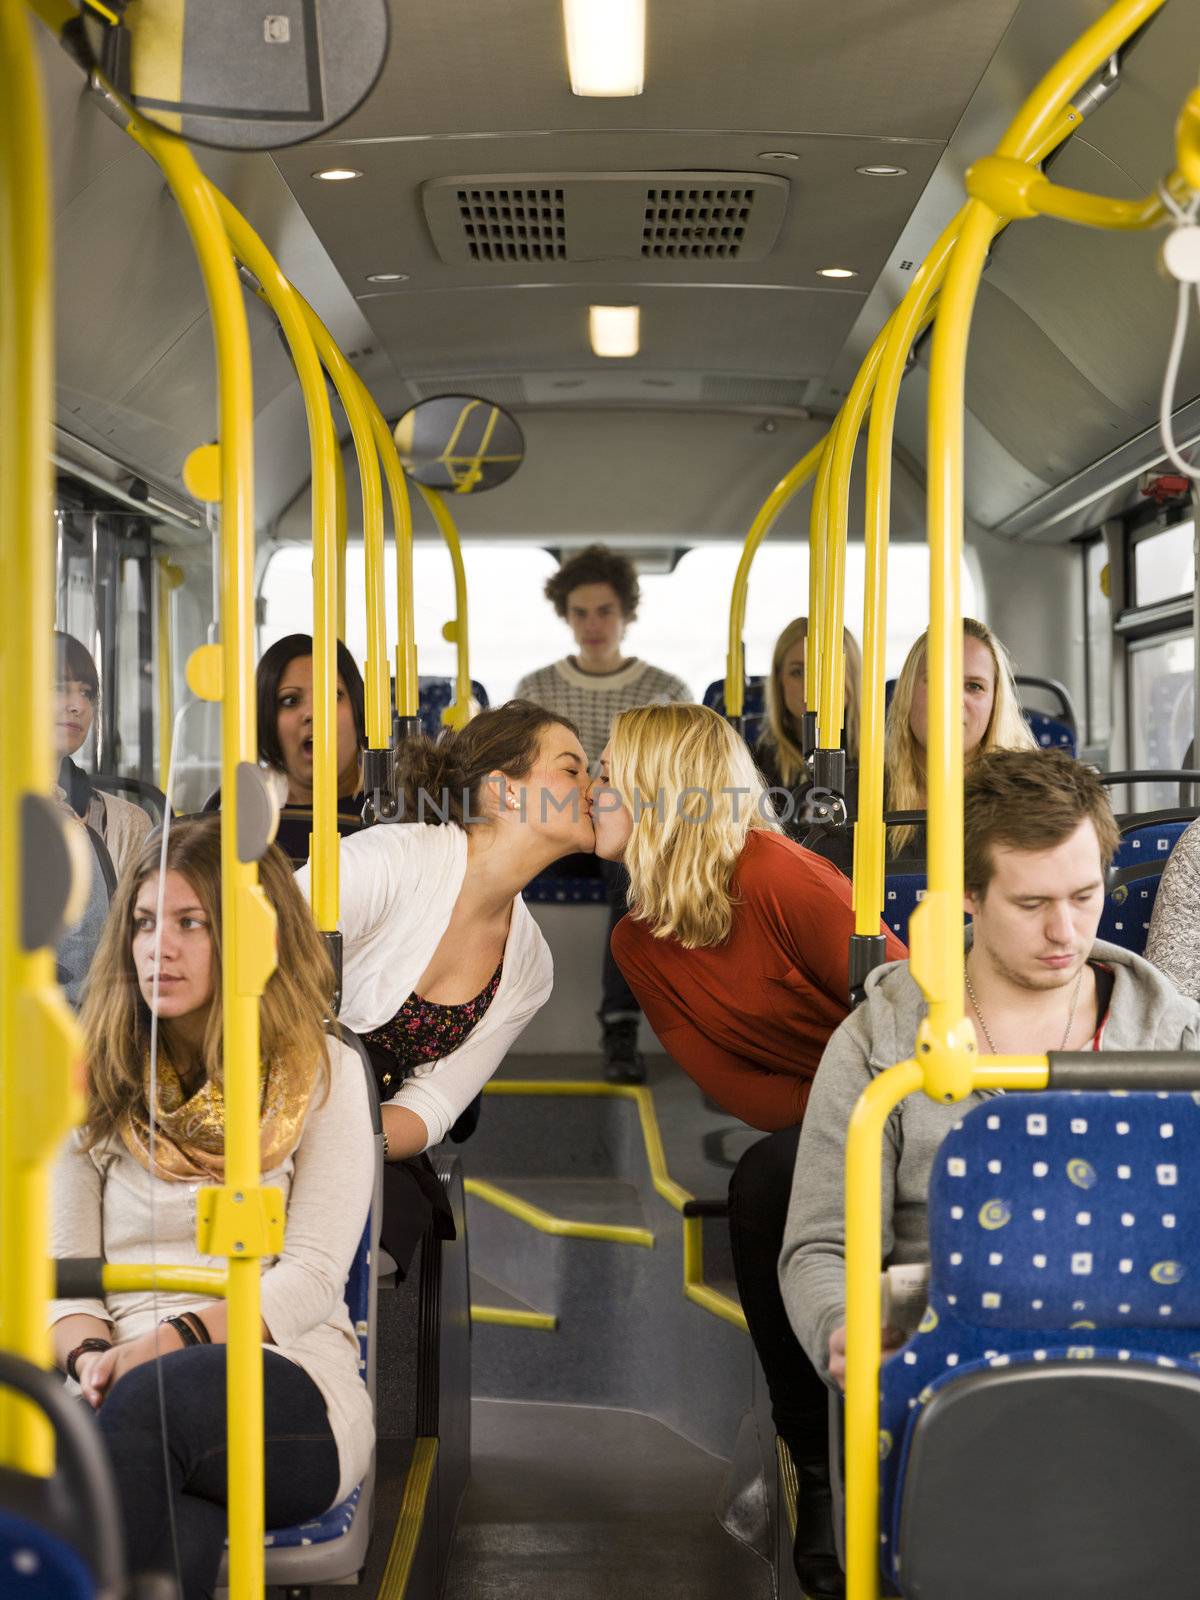 Kissing women on the bus